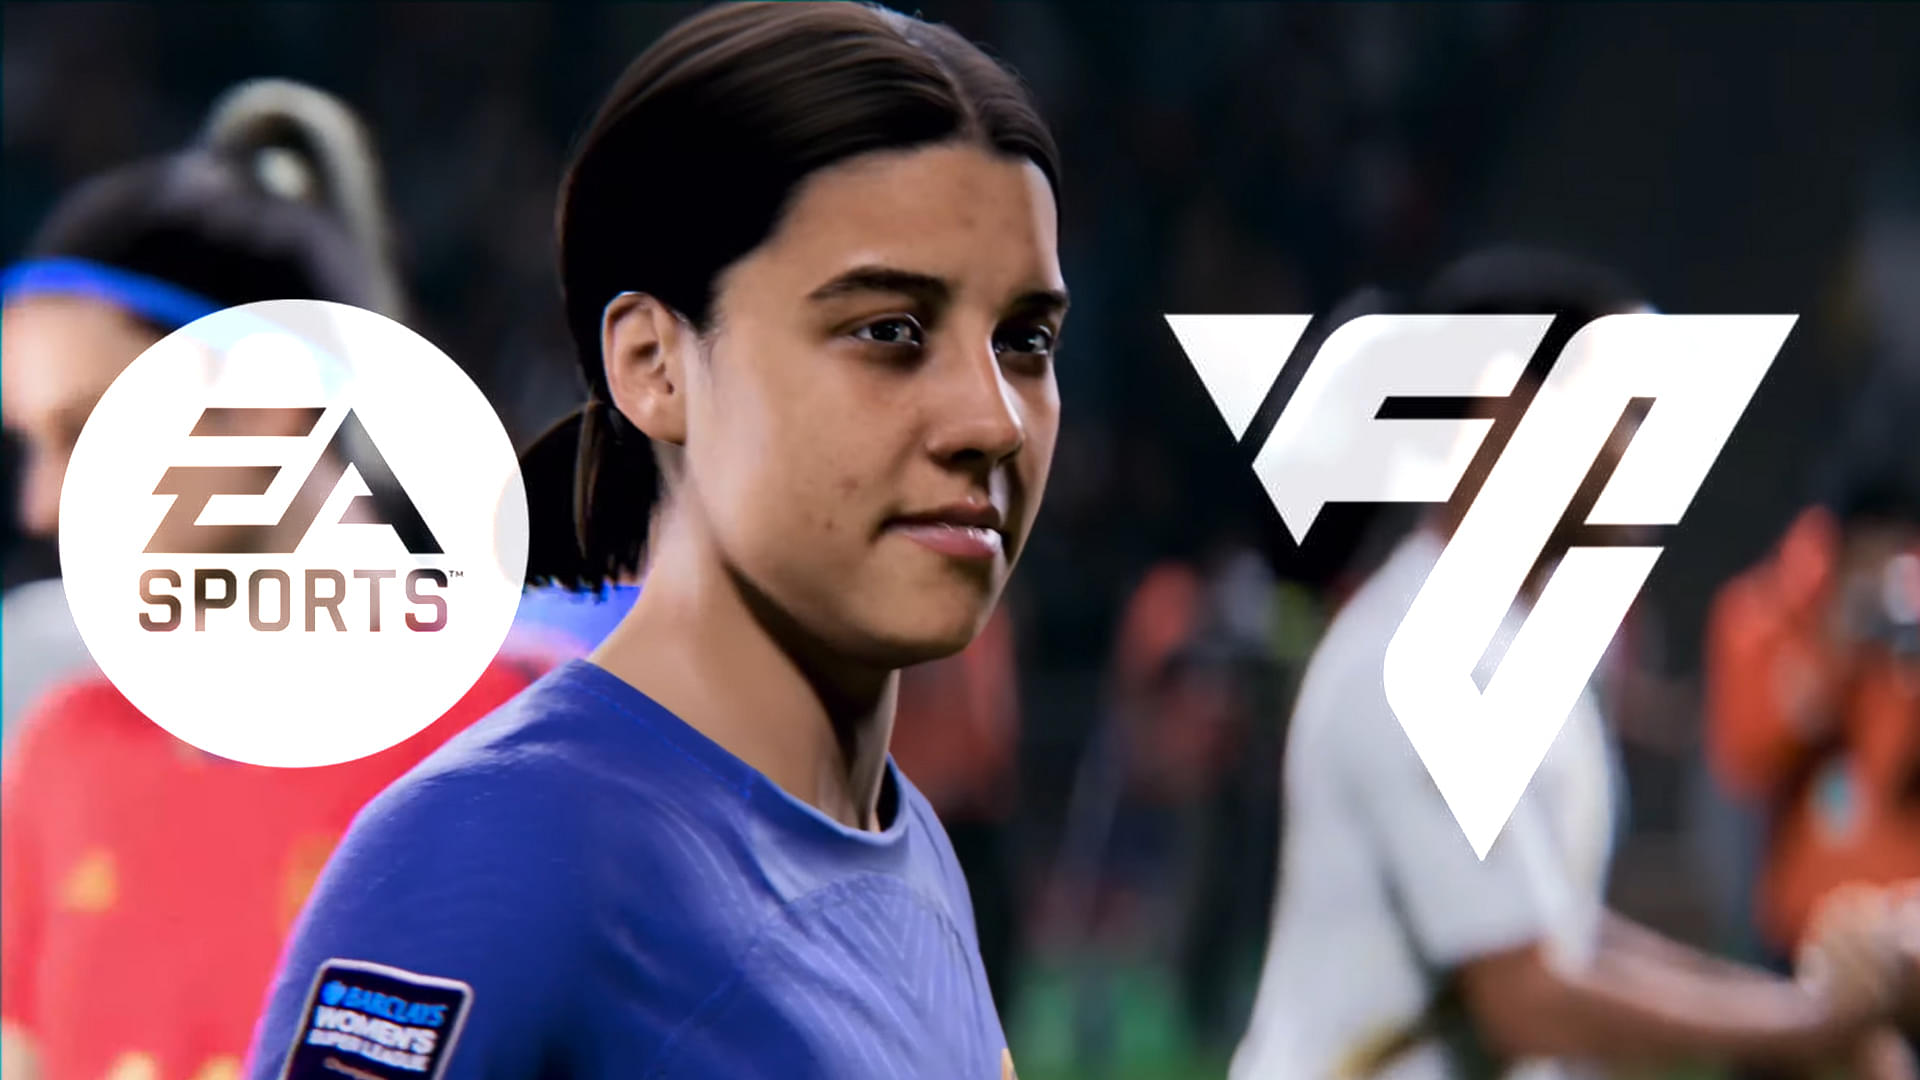 An image showing a female footballer in EA Sports FC 24